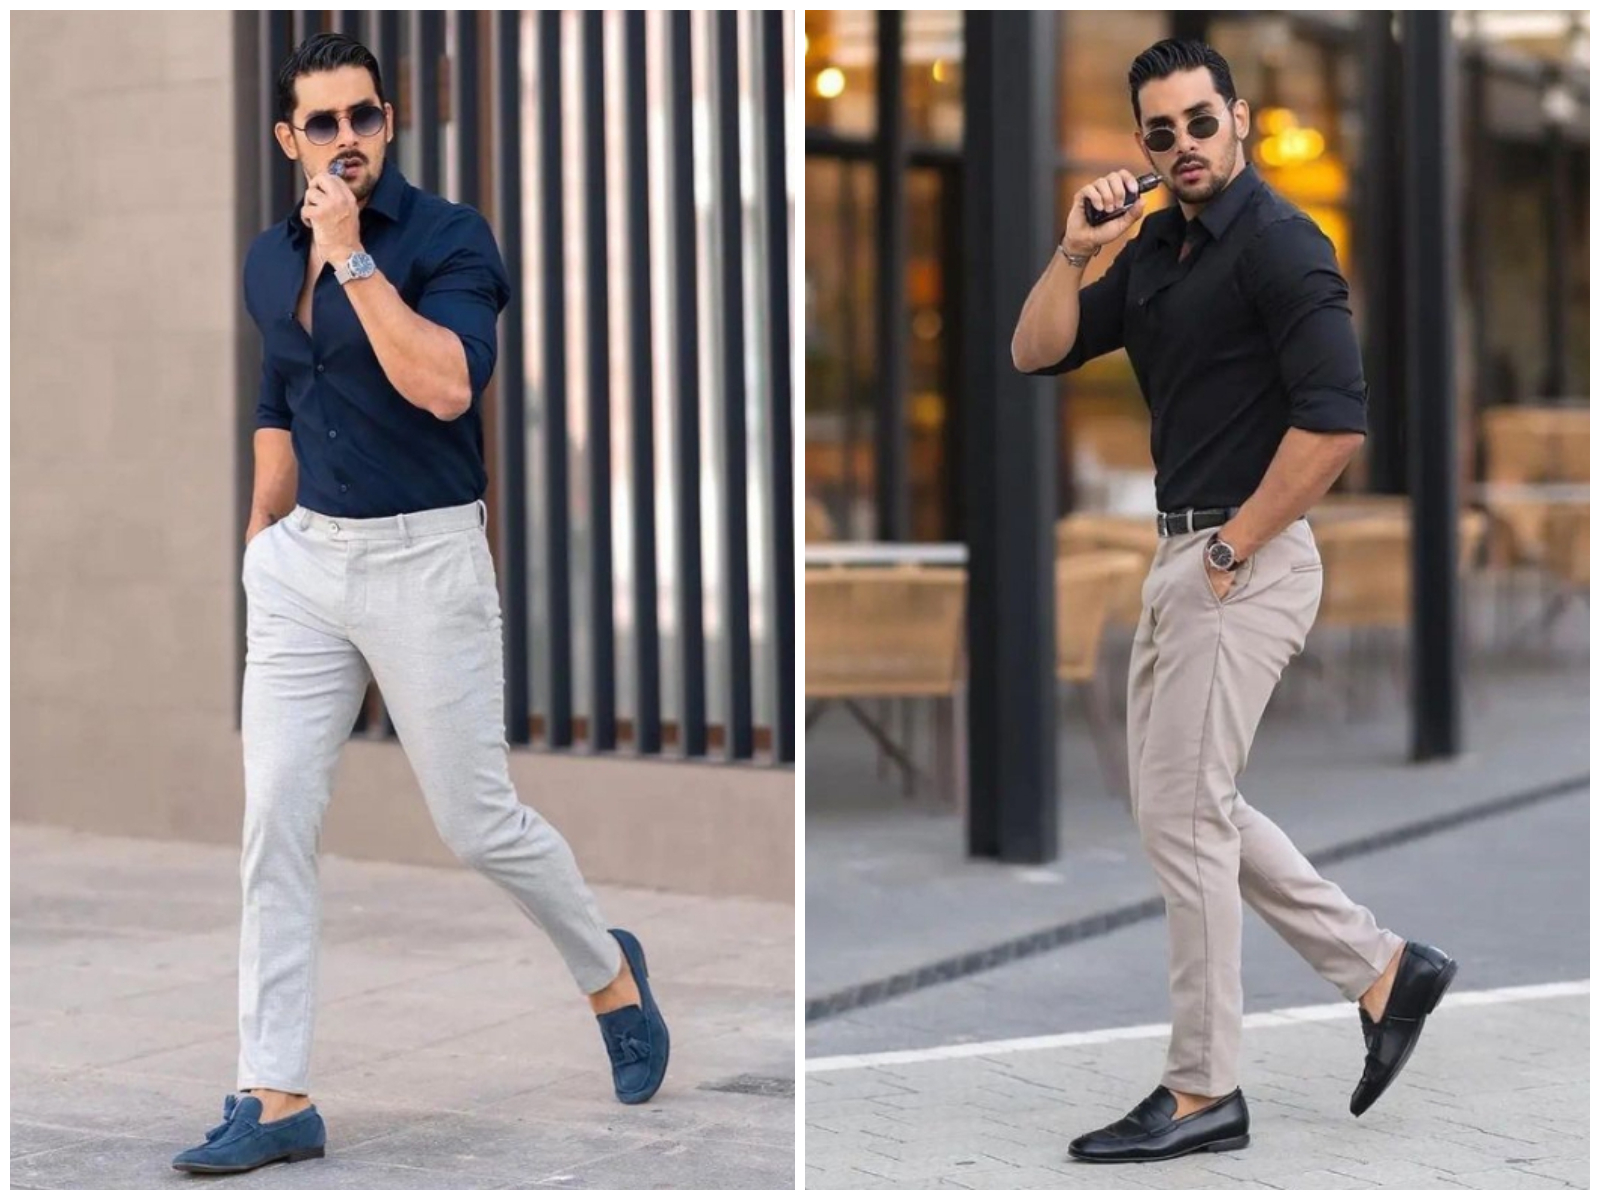 20 best men's business casual outfit ideas: Full expert guide for you ...